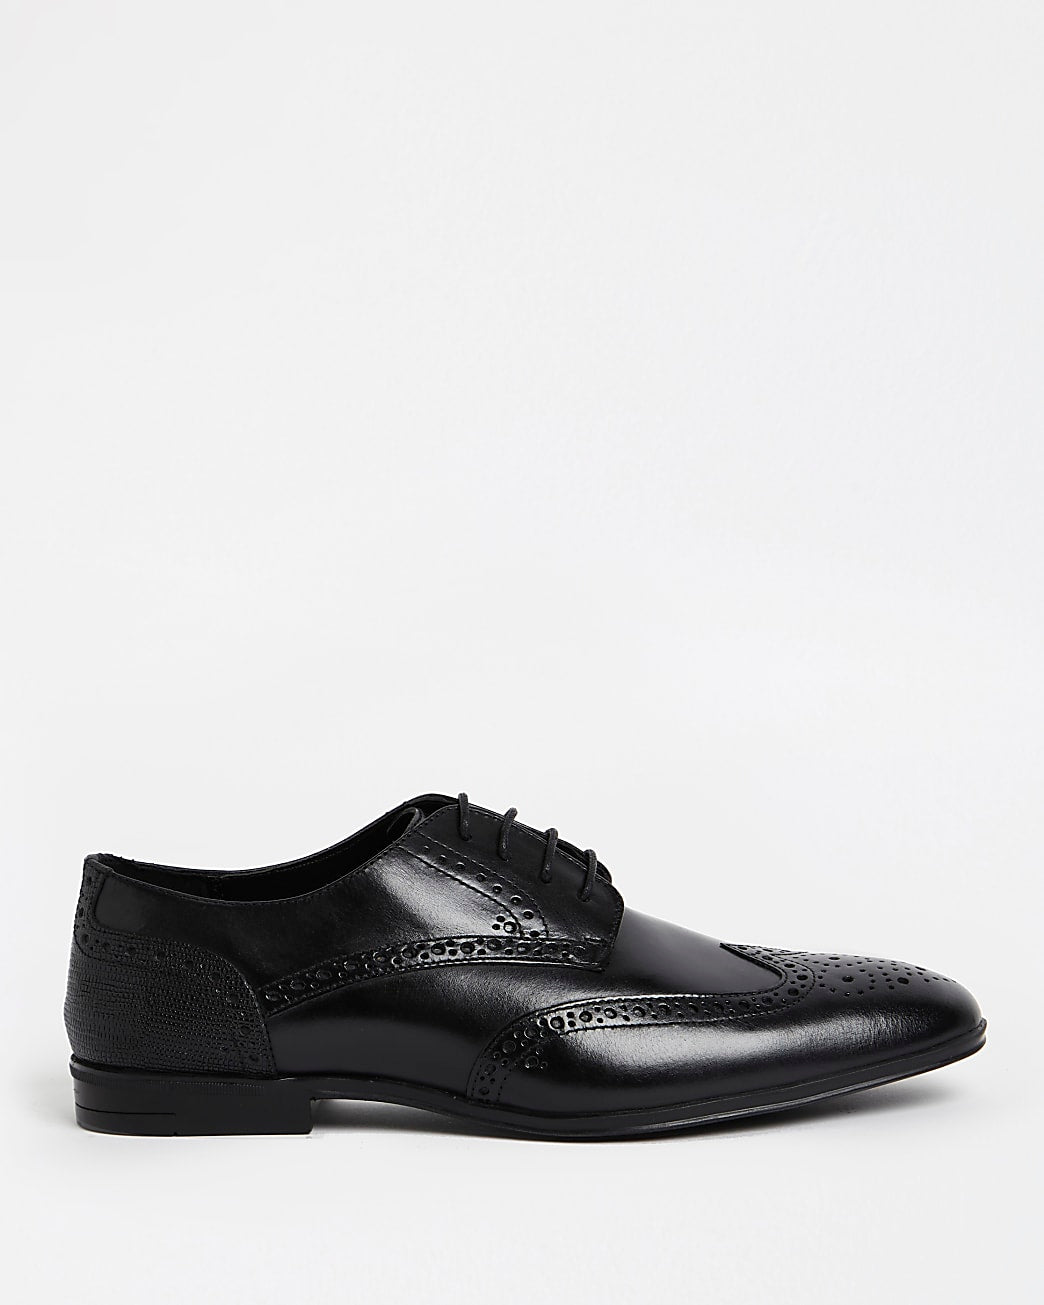 RIVER ISLAND BLACK LEATHER LACE UP BROGUE DERBY SHOES